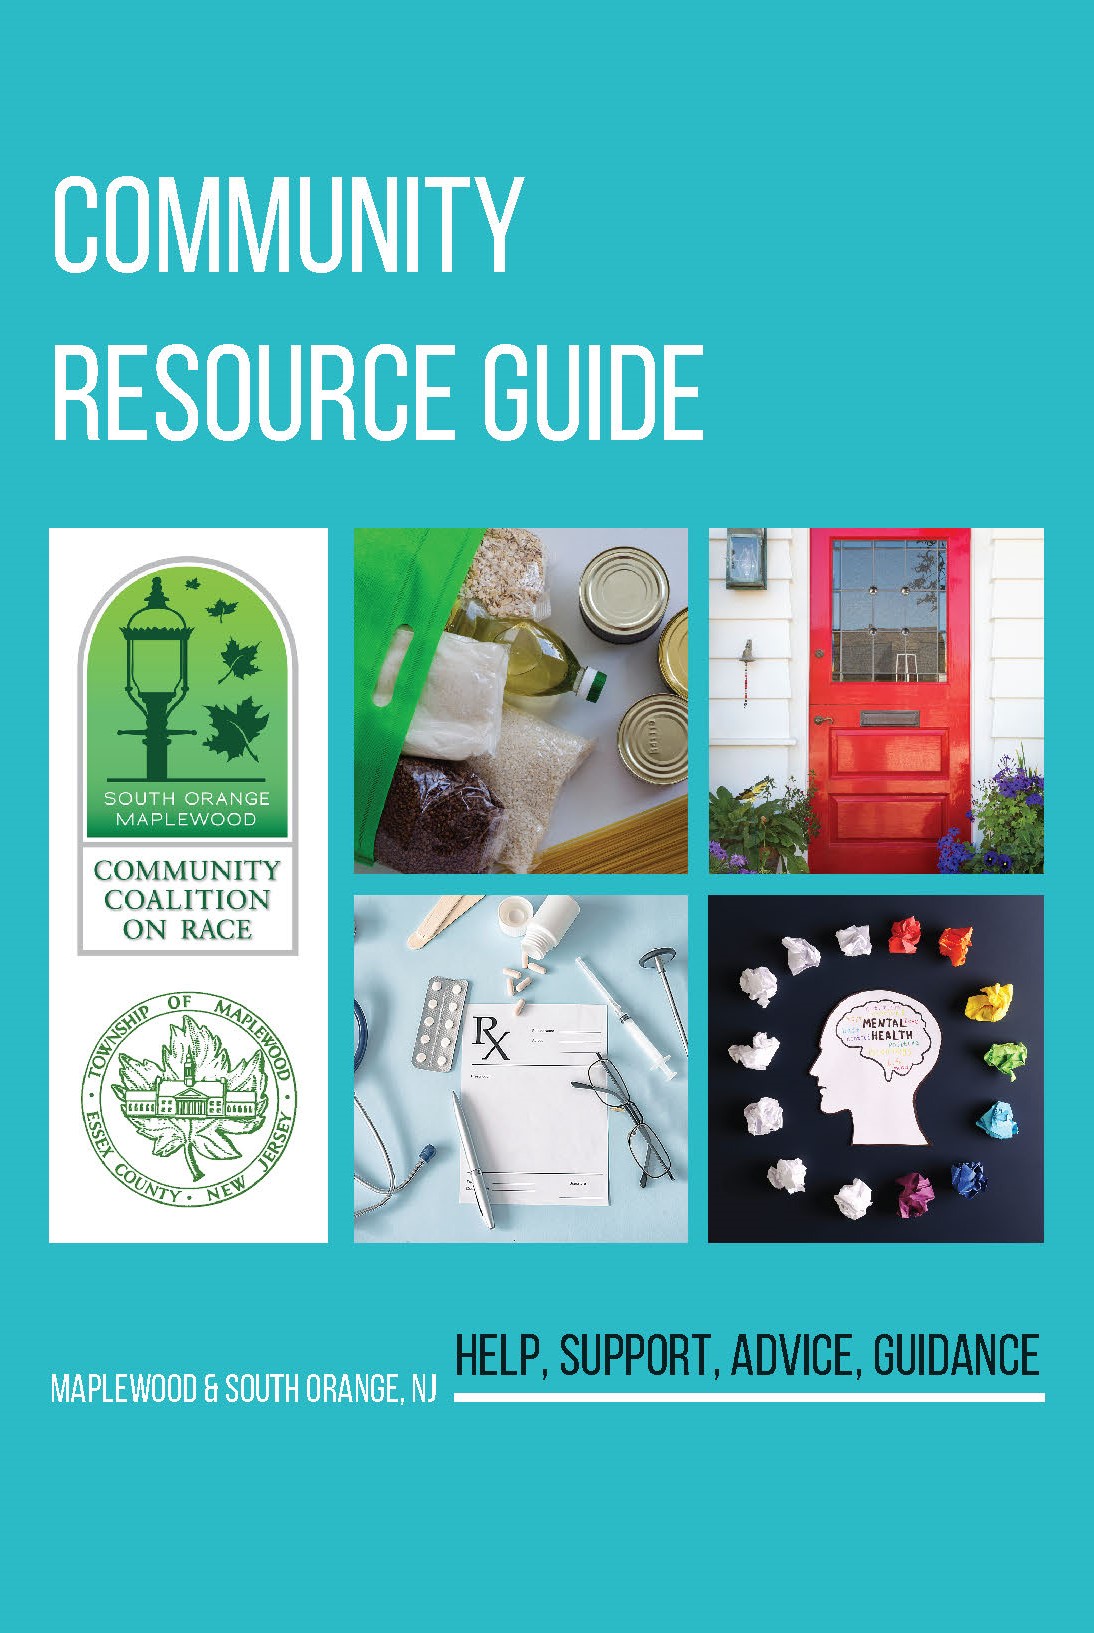 Maplewood Community Resource Guide